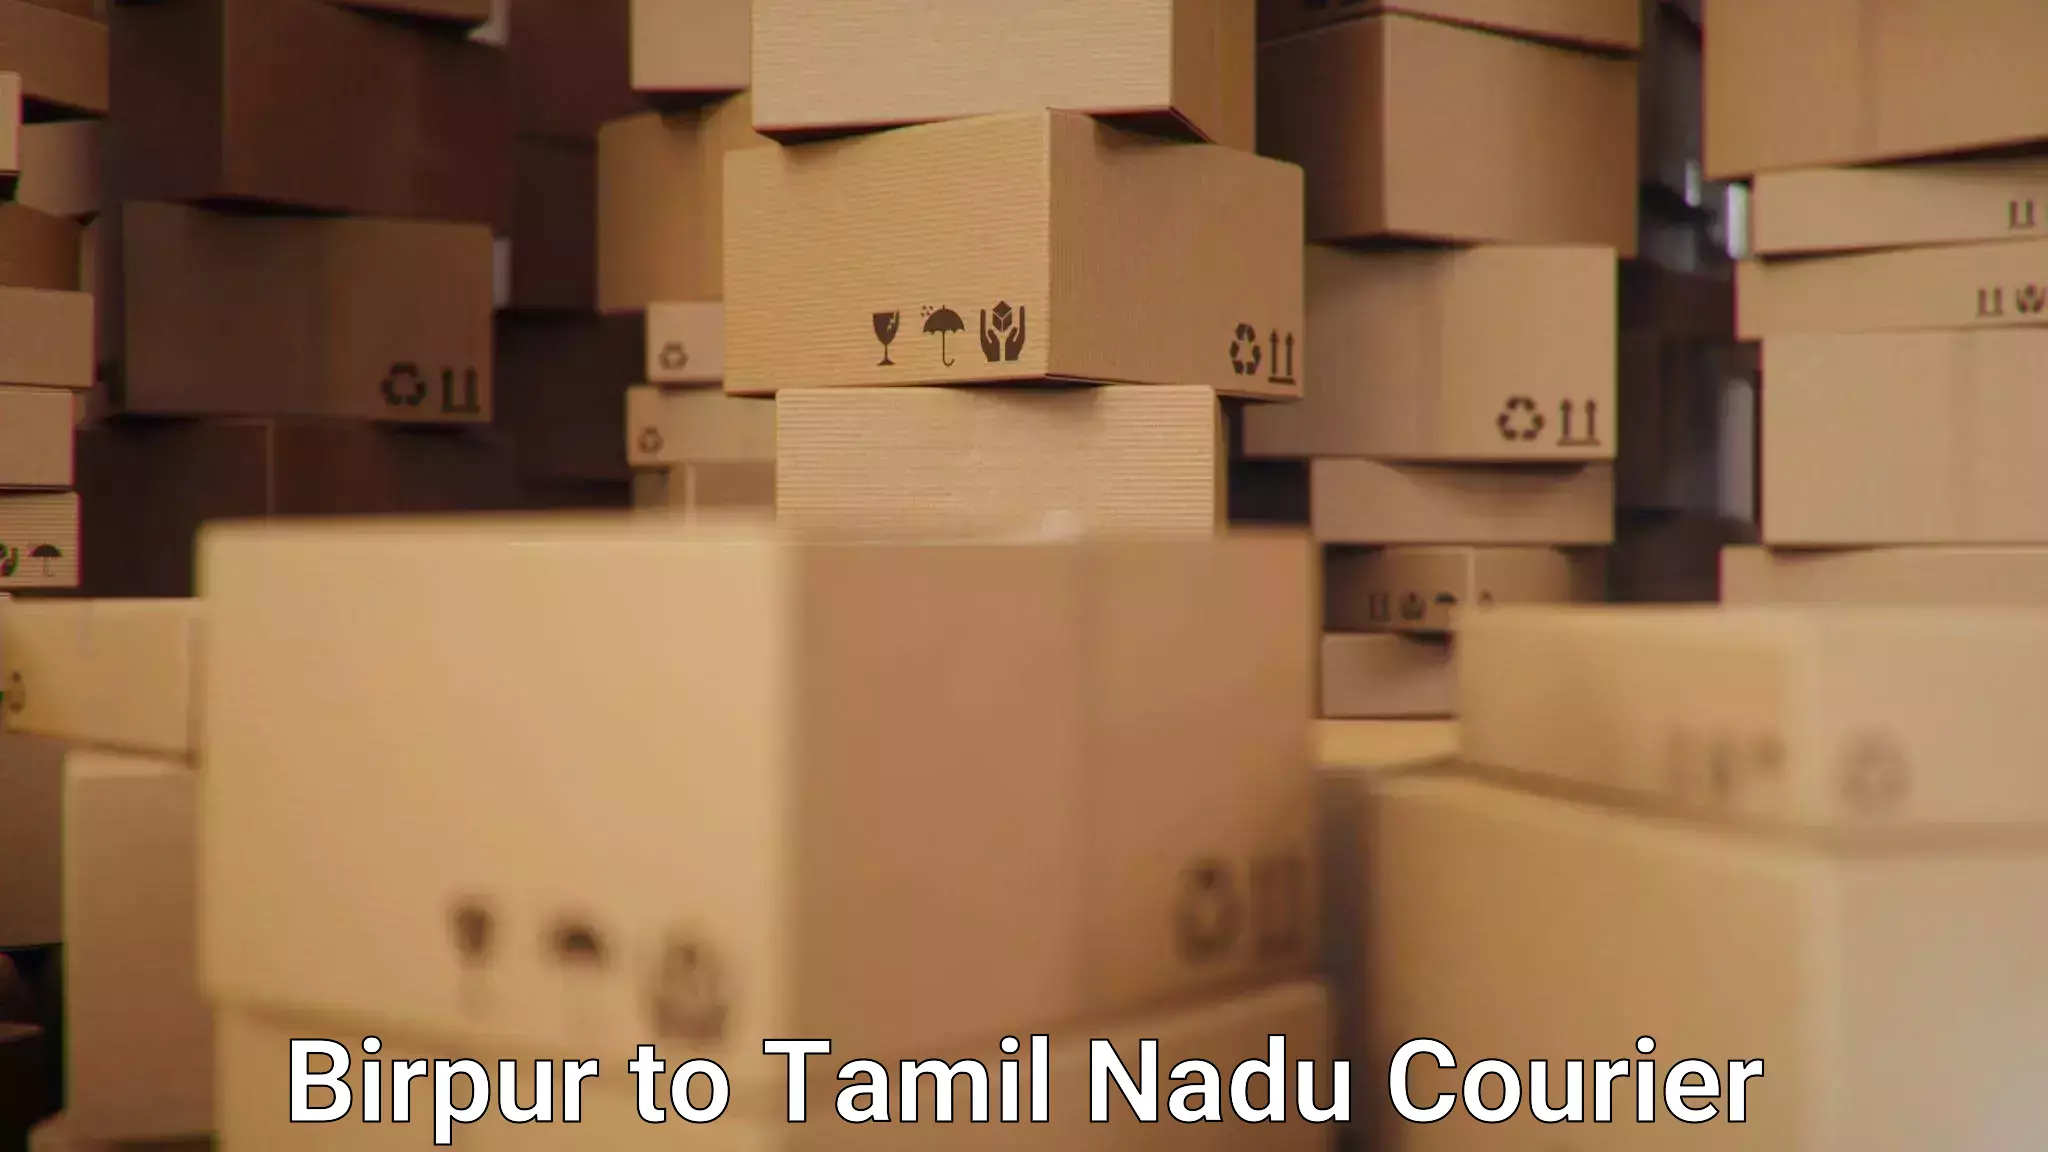 Custom courier packages Birpur to Chennai Port